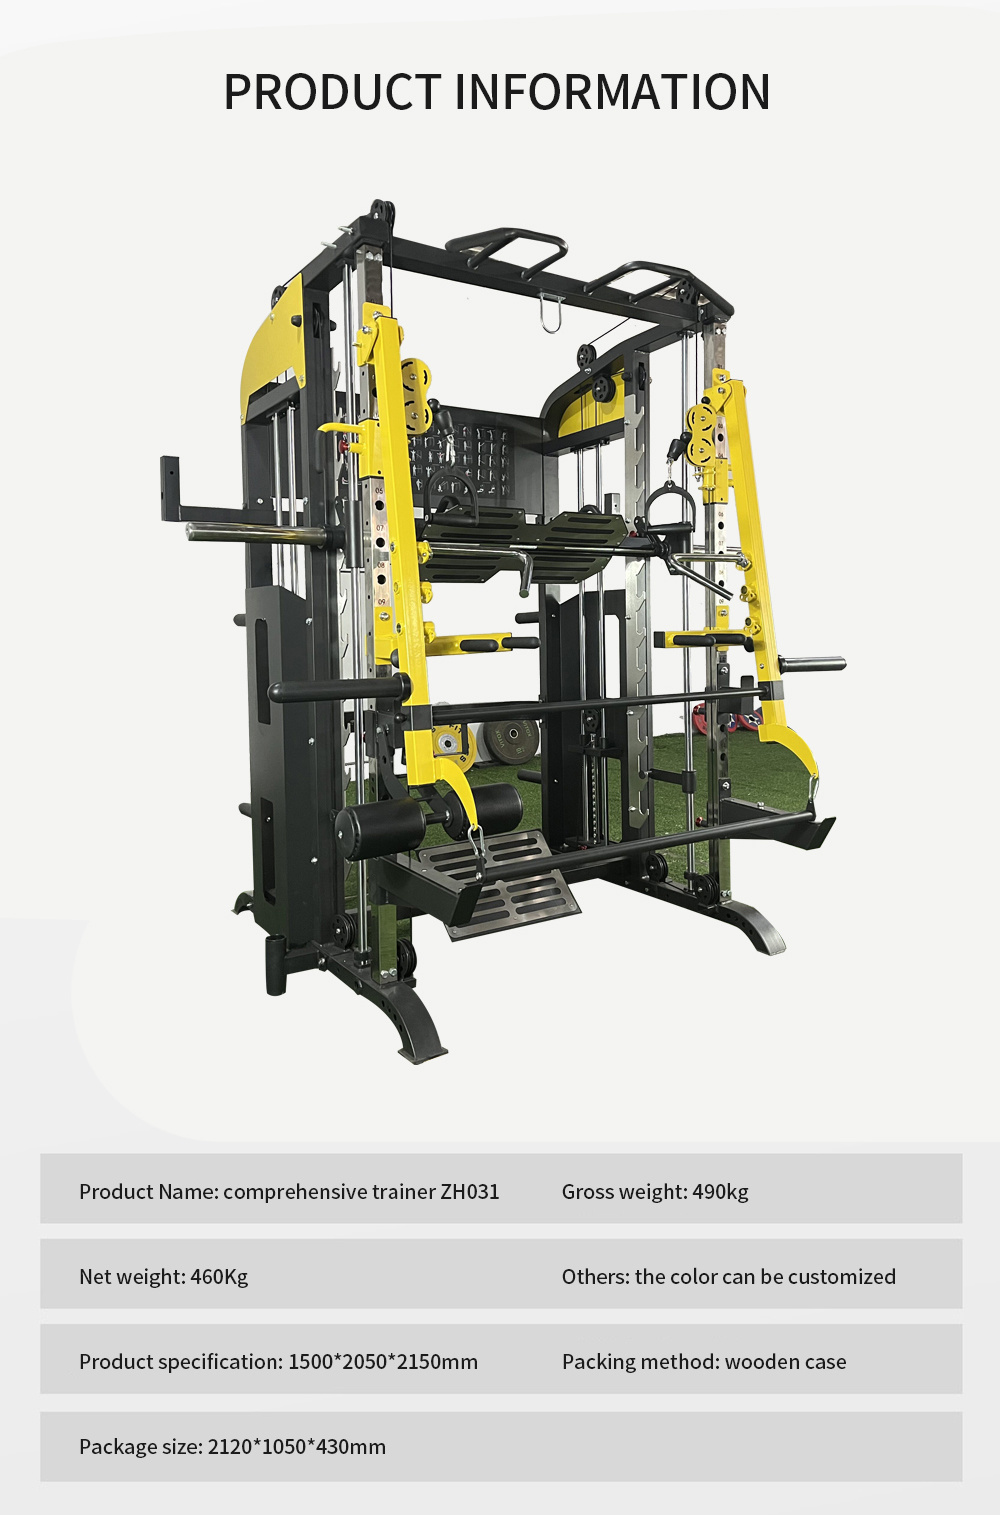 Multifunctional Home Smith Machine with Weight Stack Wholesale Fitness Equipment Manufacturer